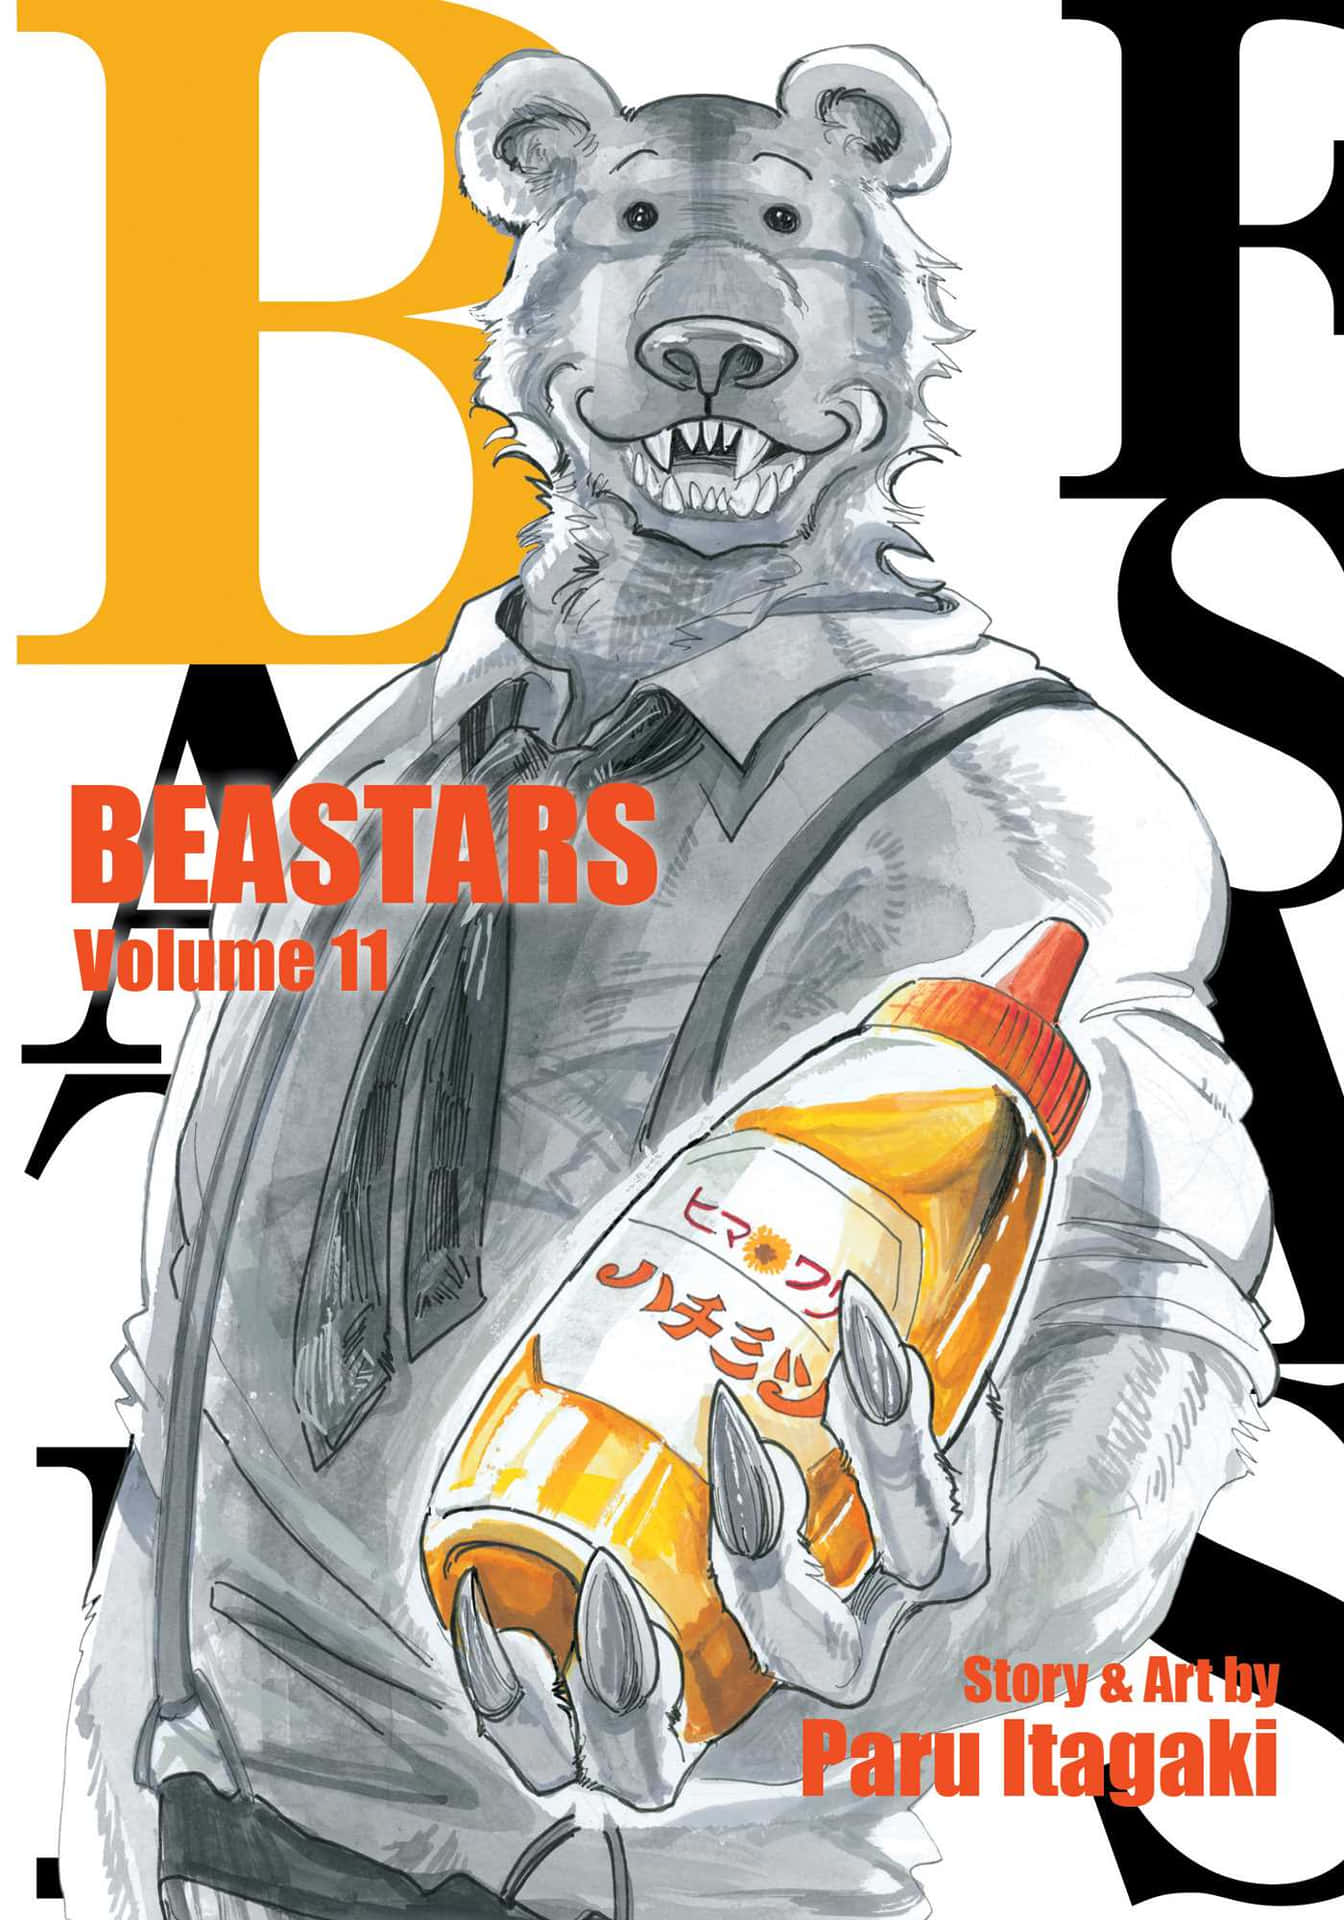 "Live Wild and Free; Find Your Place in Beastars"